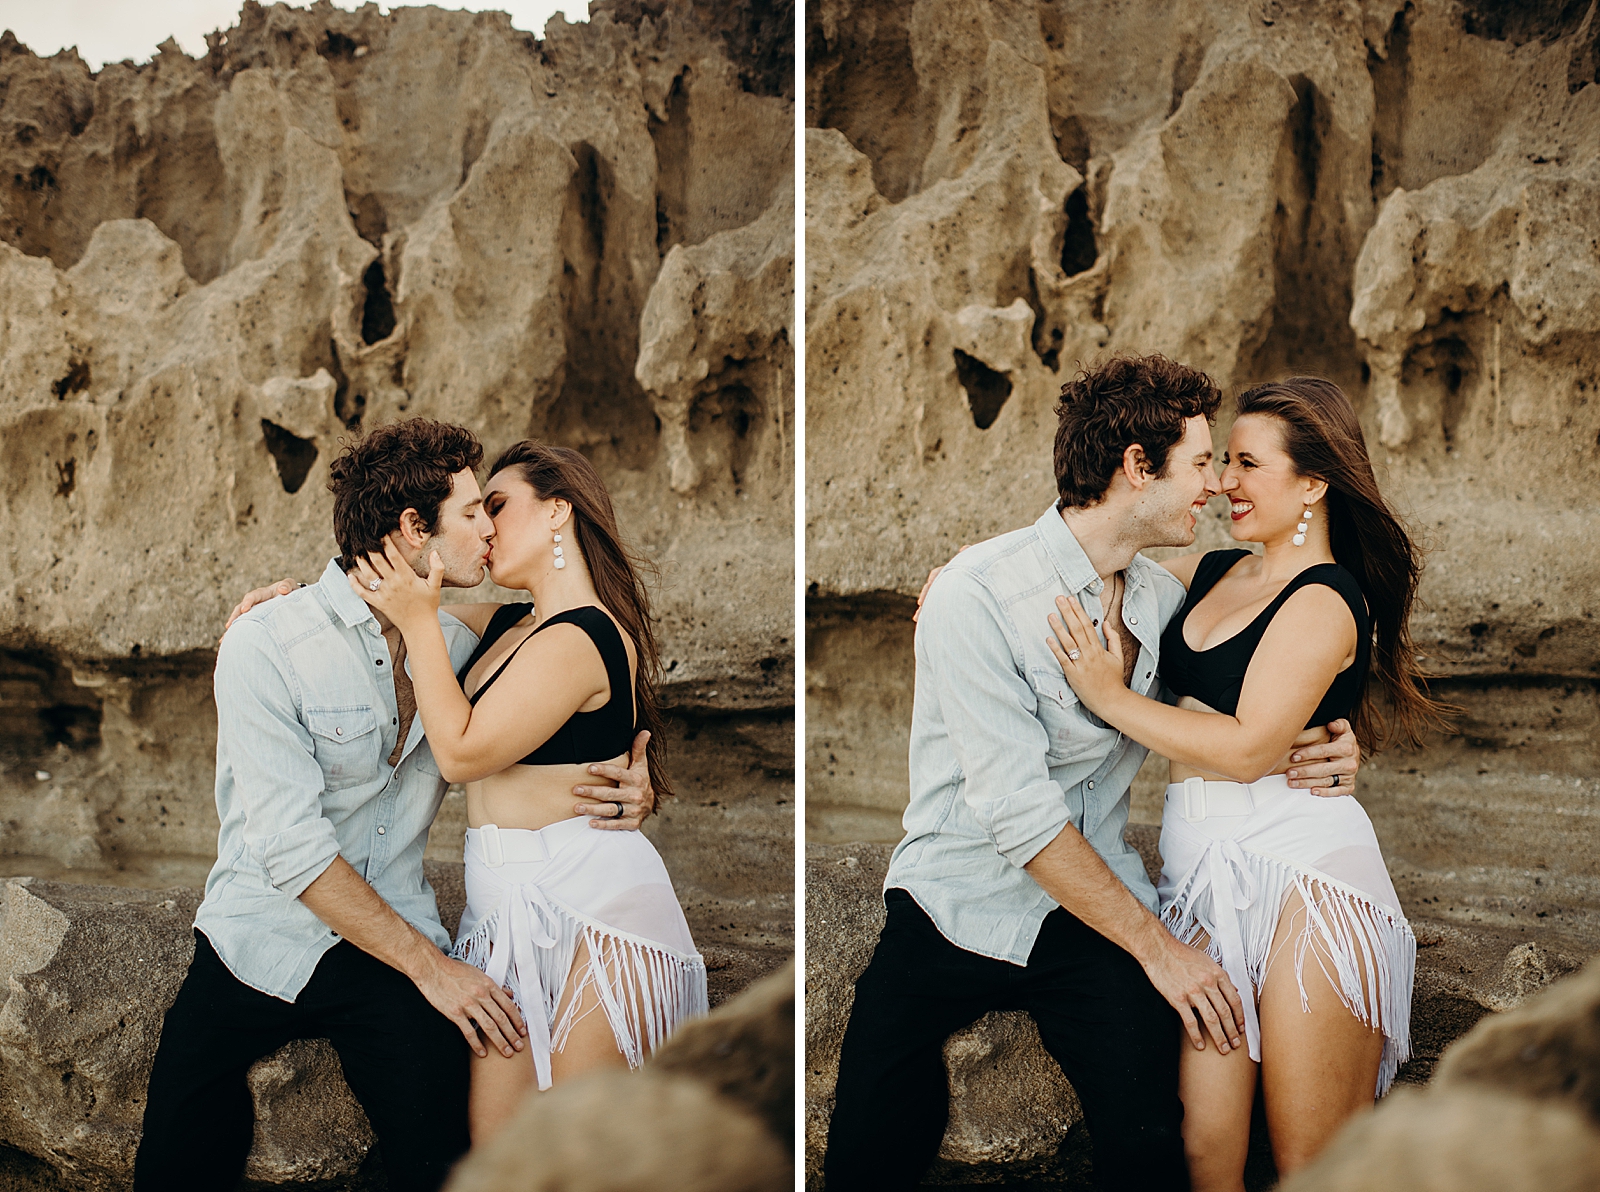 Couple sitting on textured beach rock and kissing